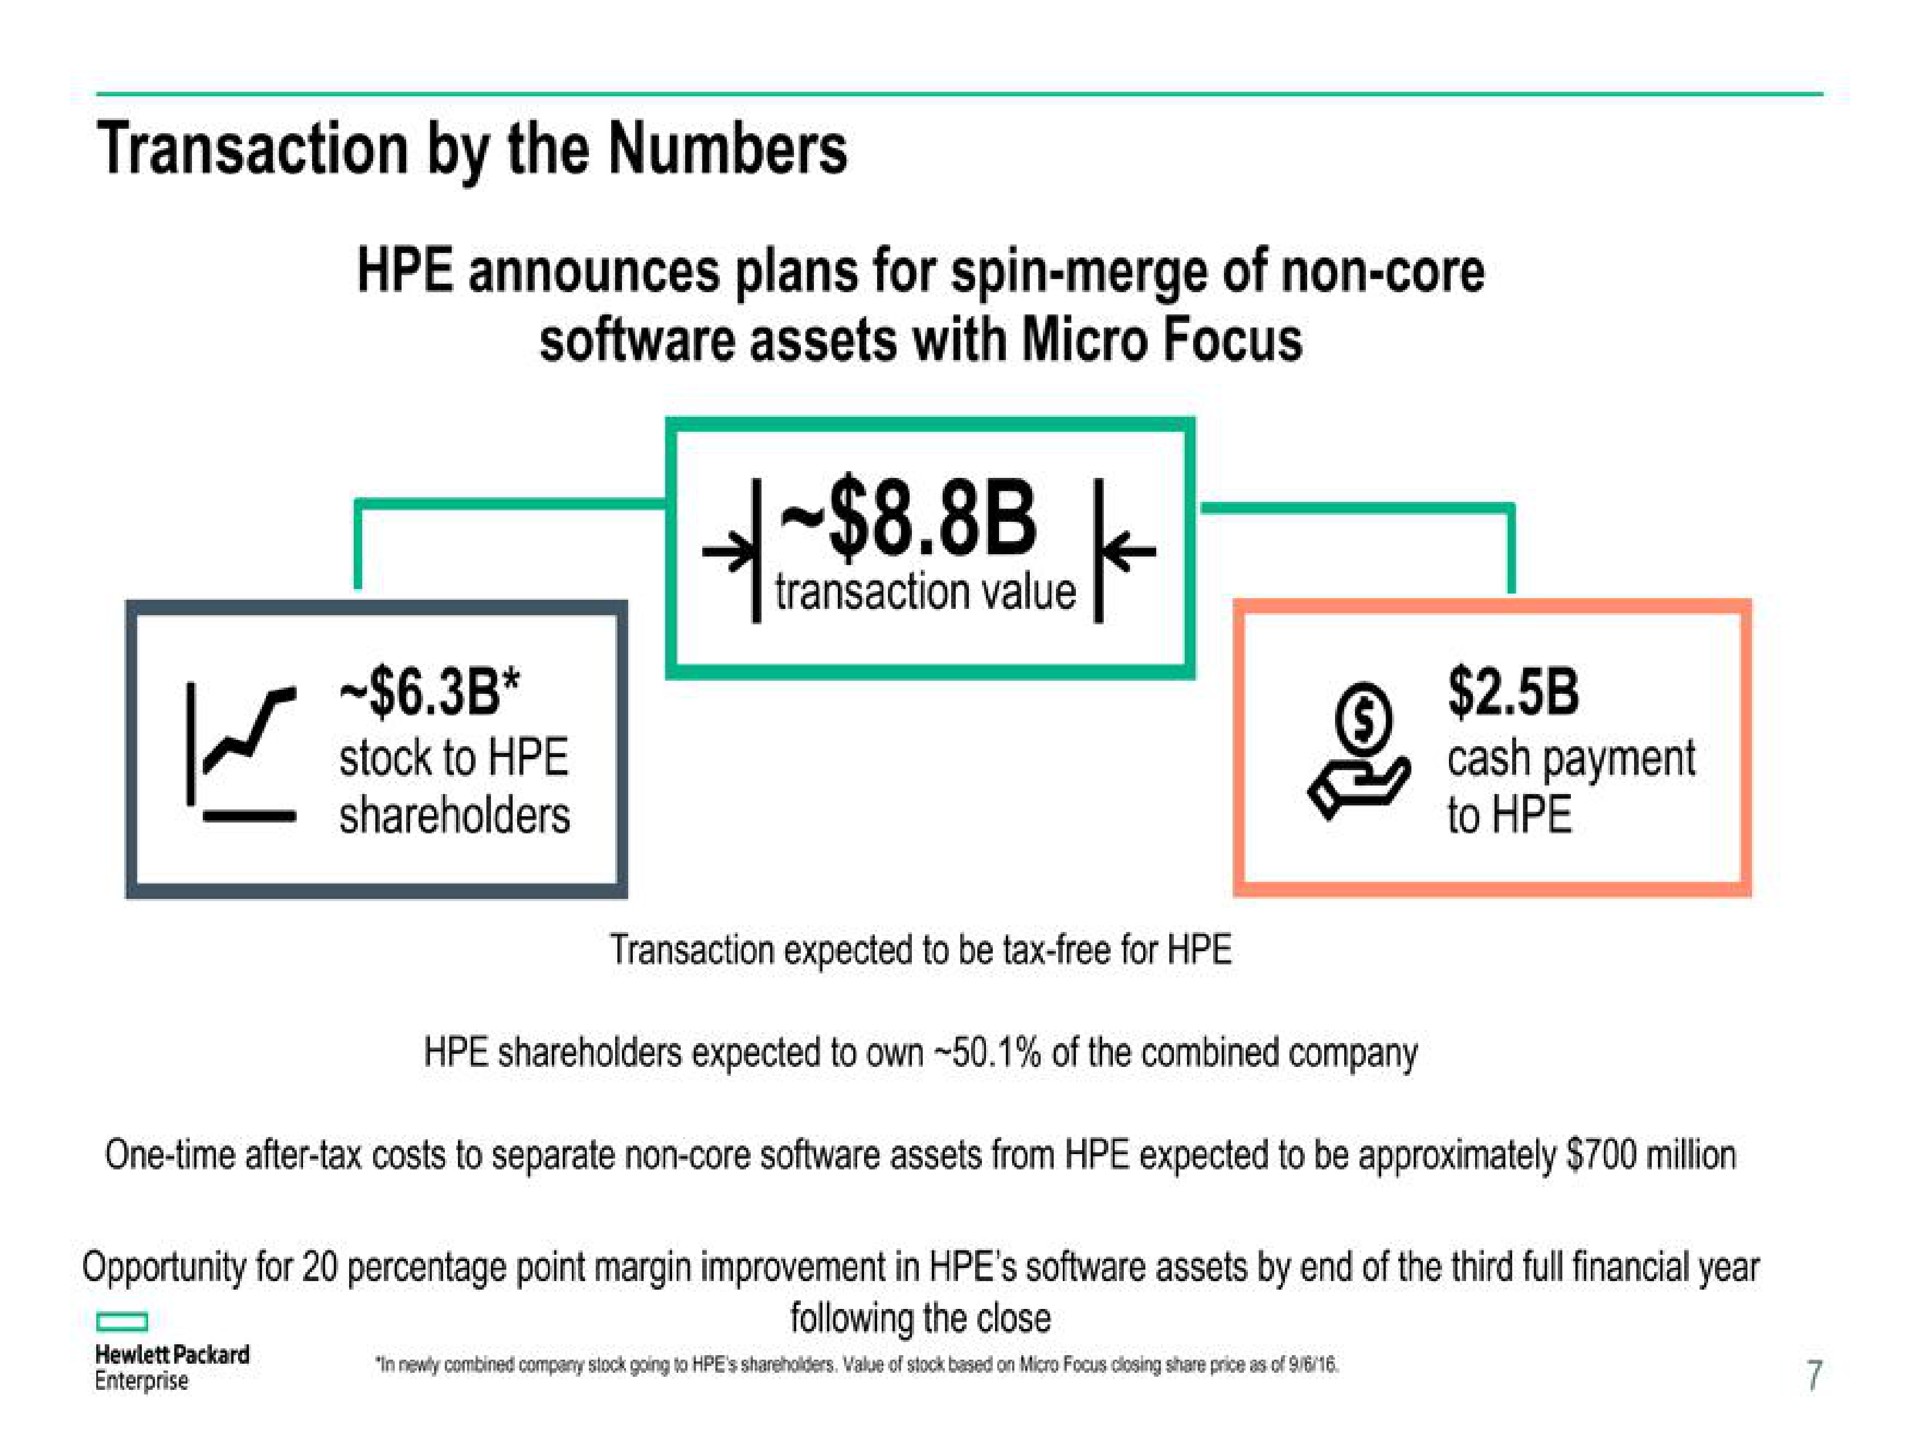 transaction by the numbers | Hewlett Packard Enterprise